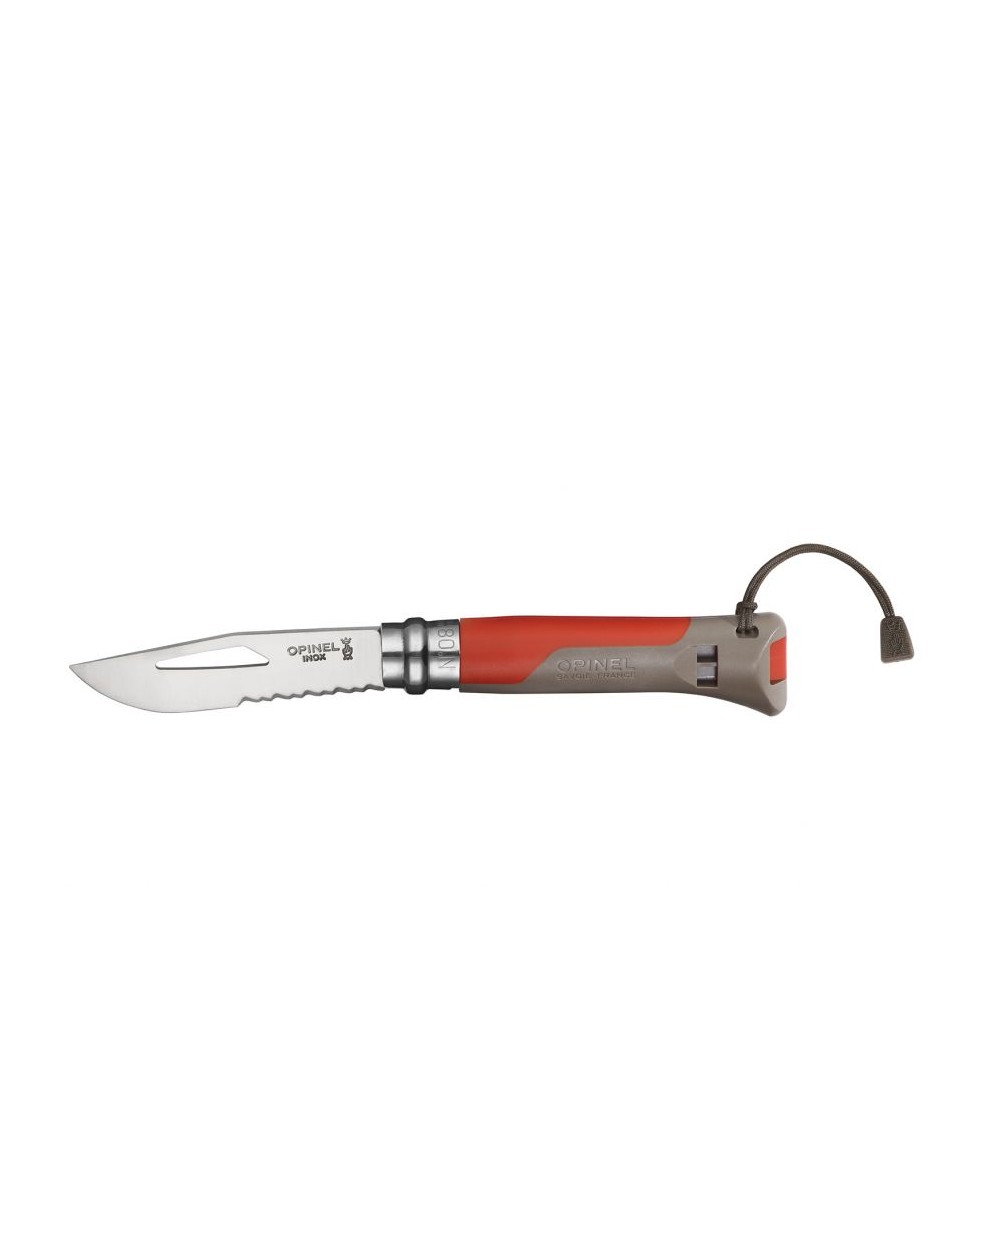 Couteau opinel n°8 outdoor avec manche terre/rouge